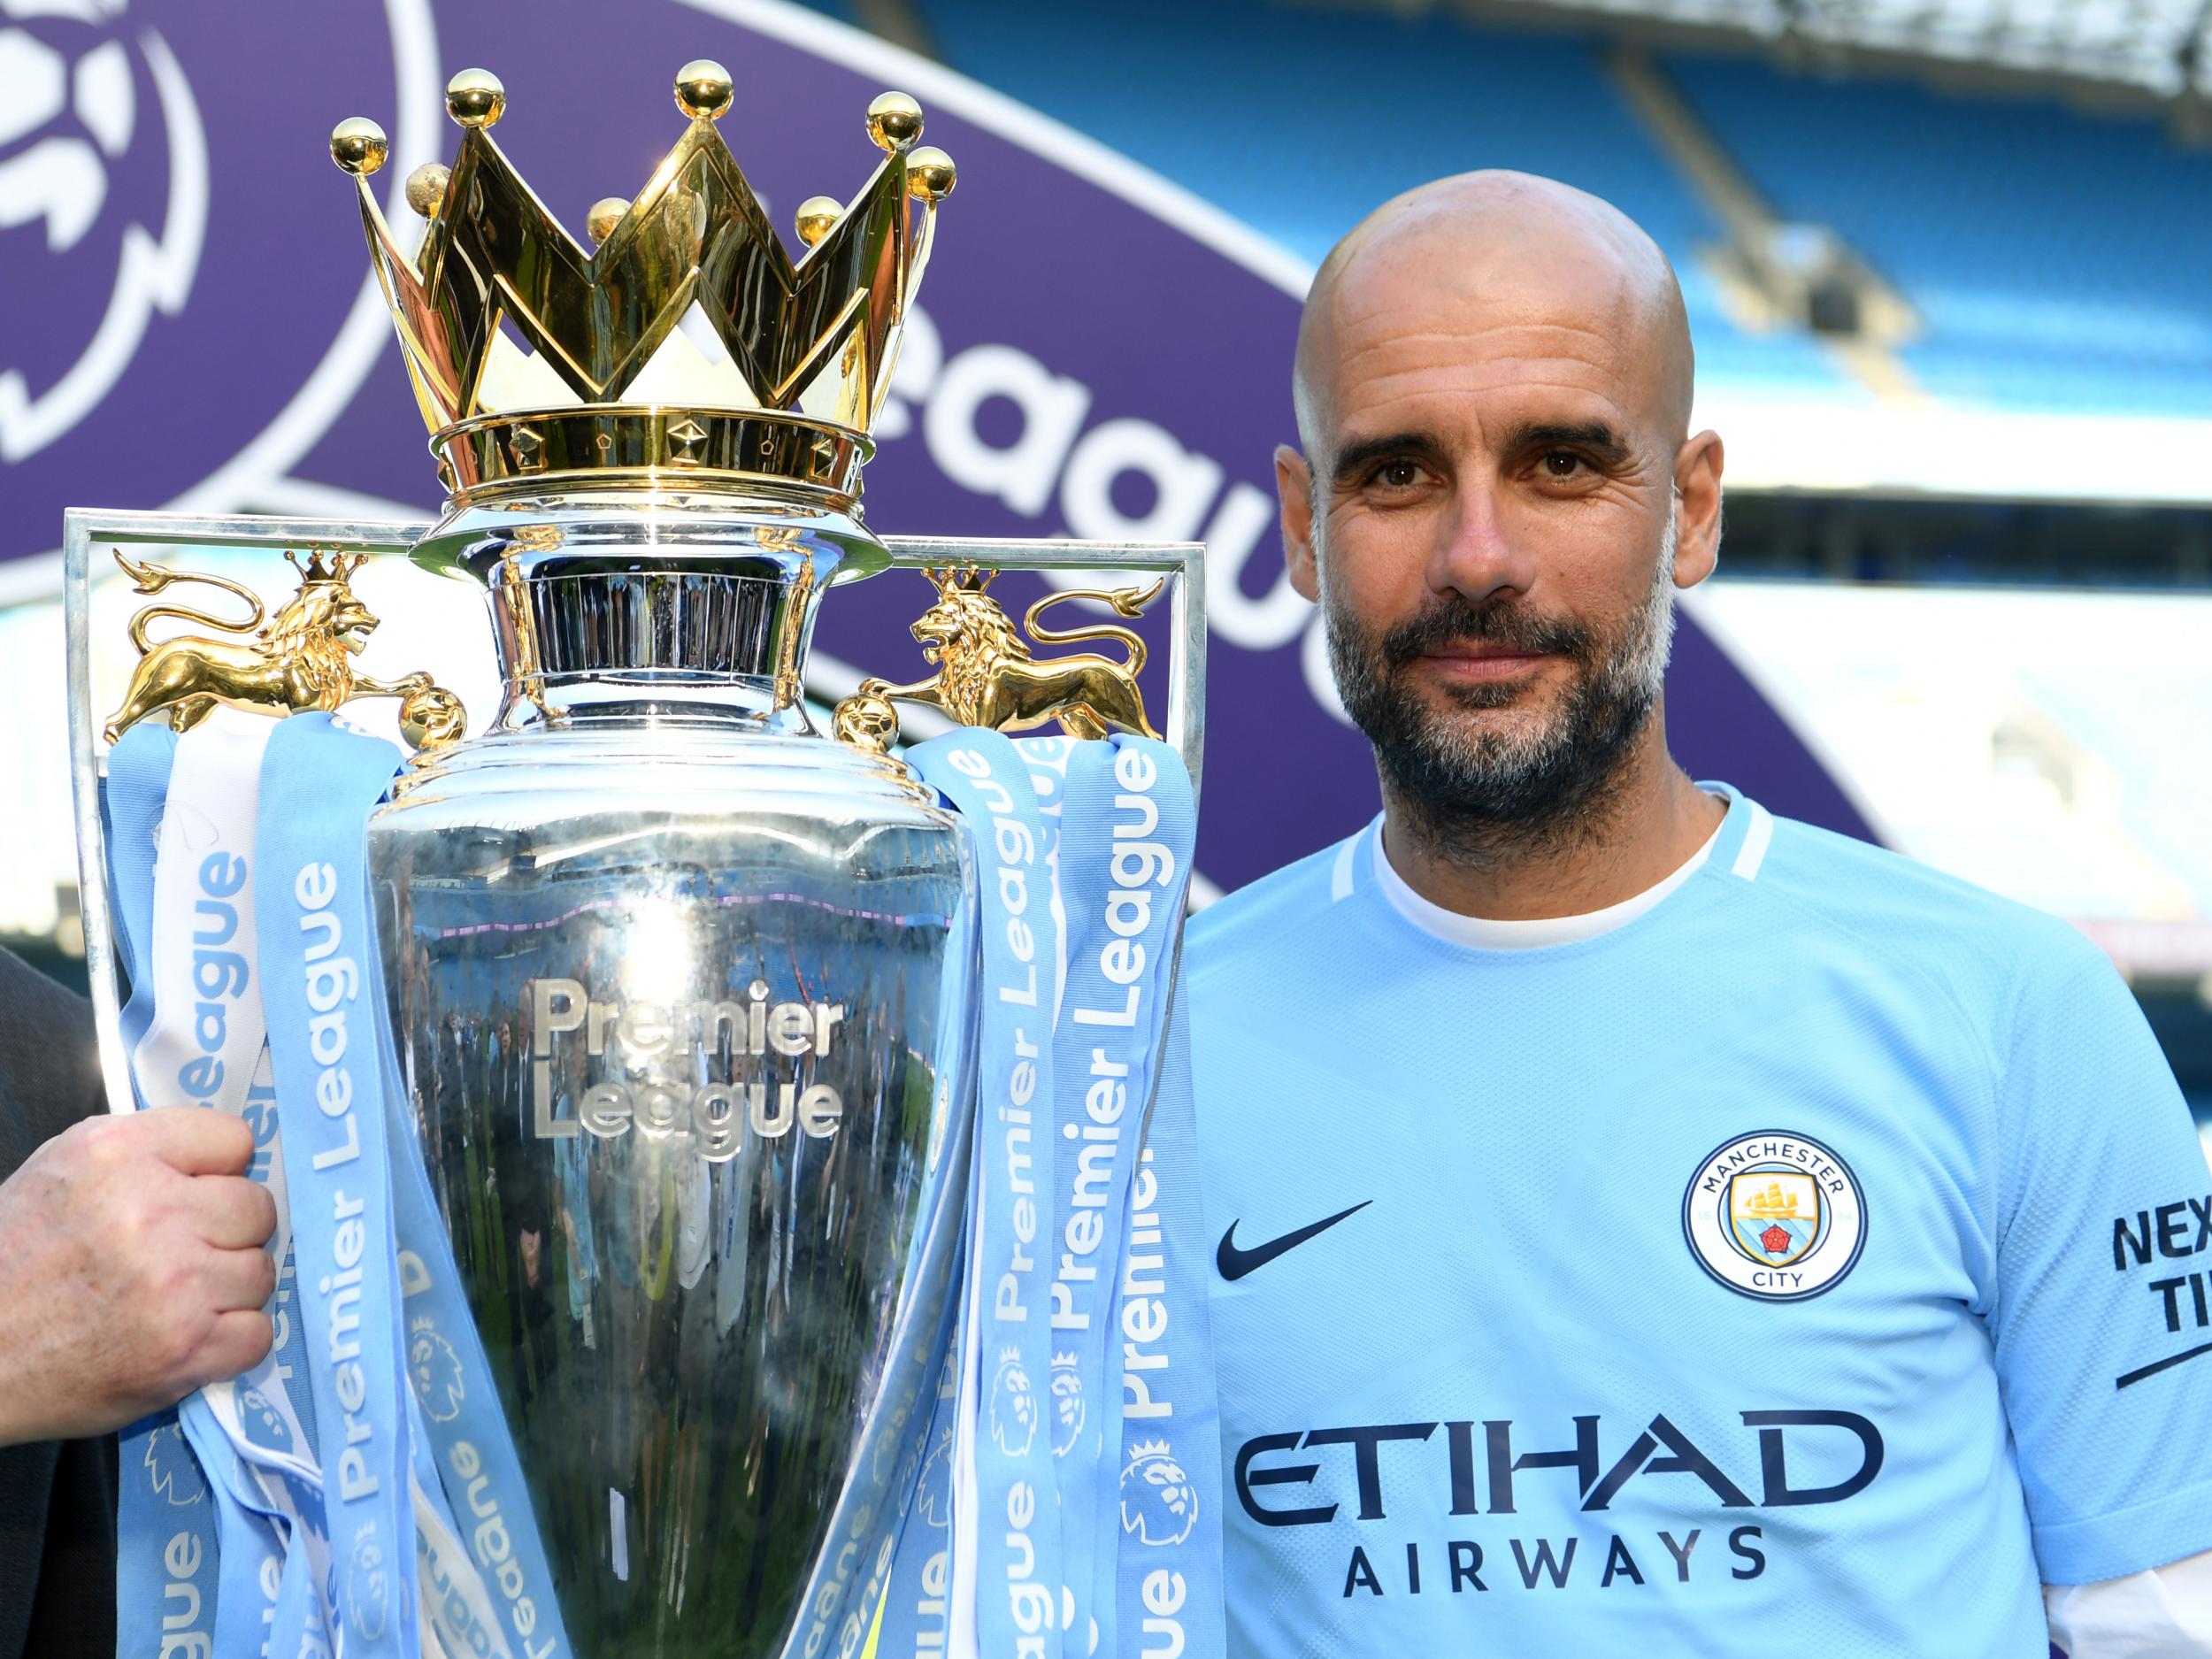 Pep Guardiola celebrated his first Premier League title win on Sunday